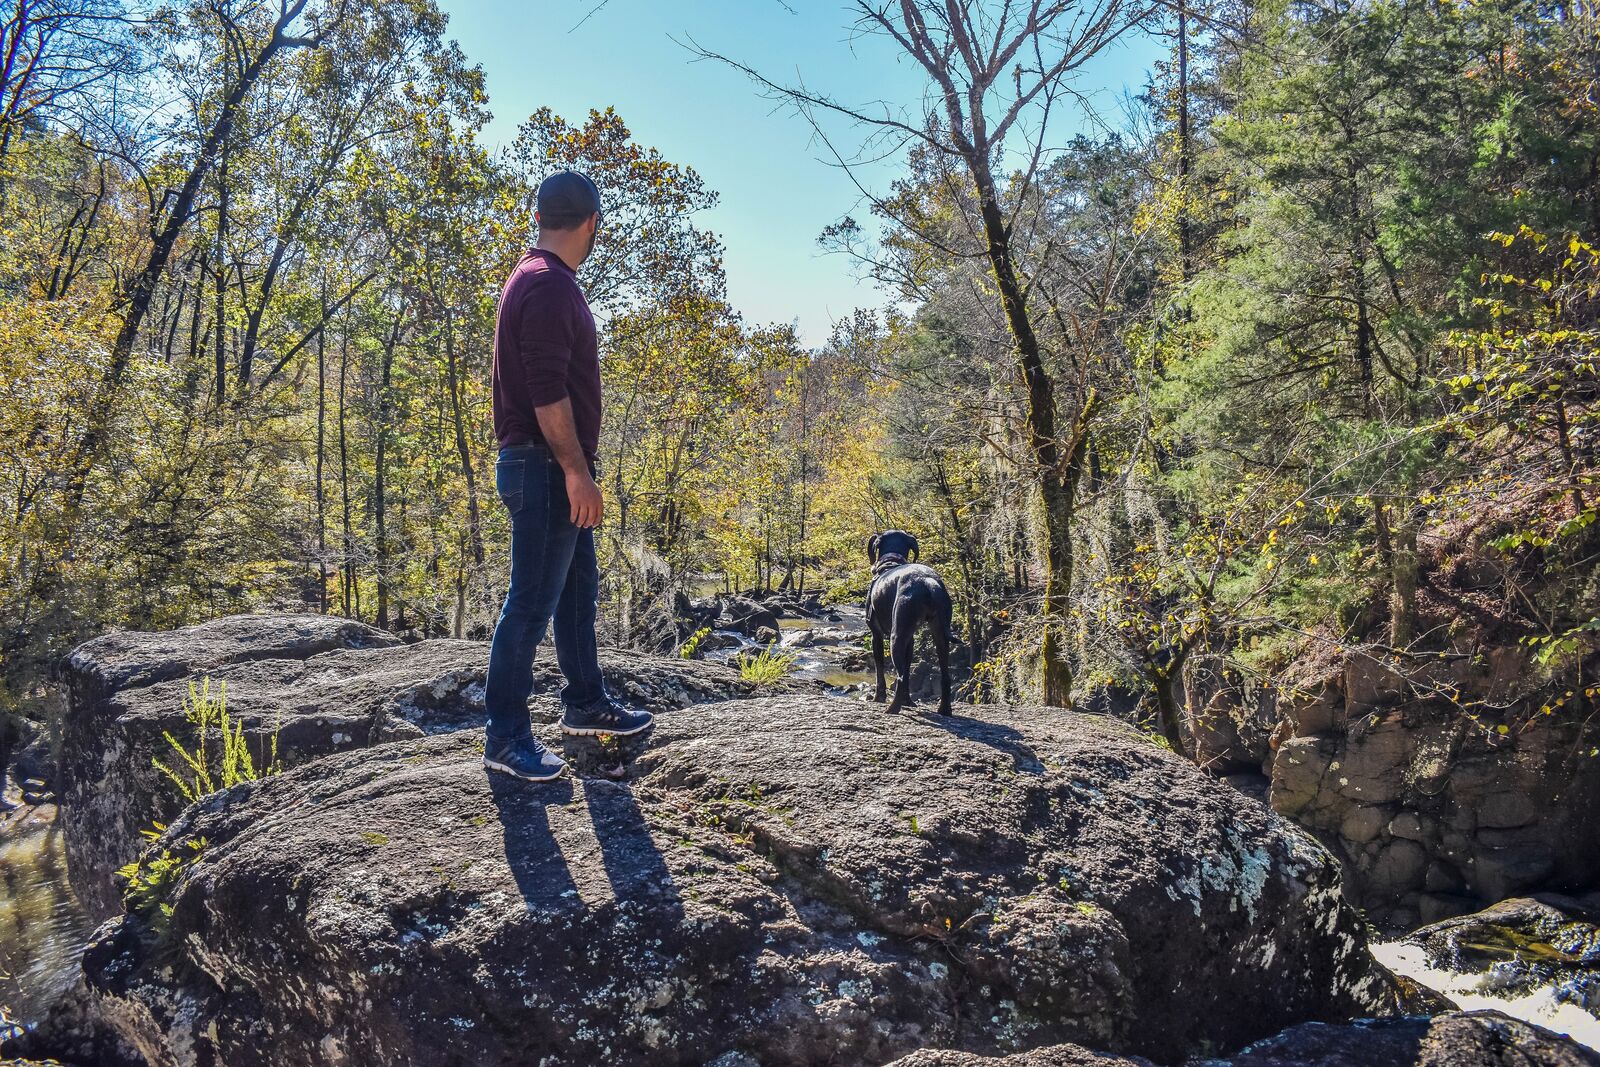 Man with a dog looking out over a forest on a rock